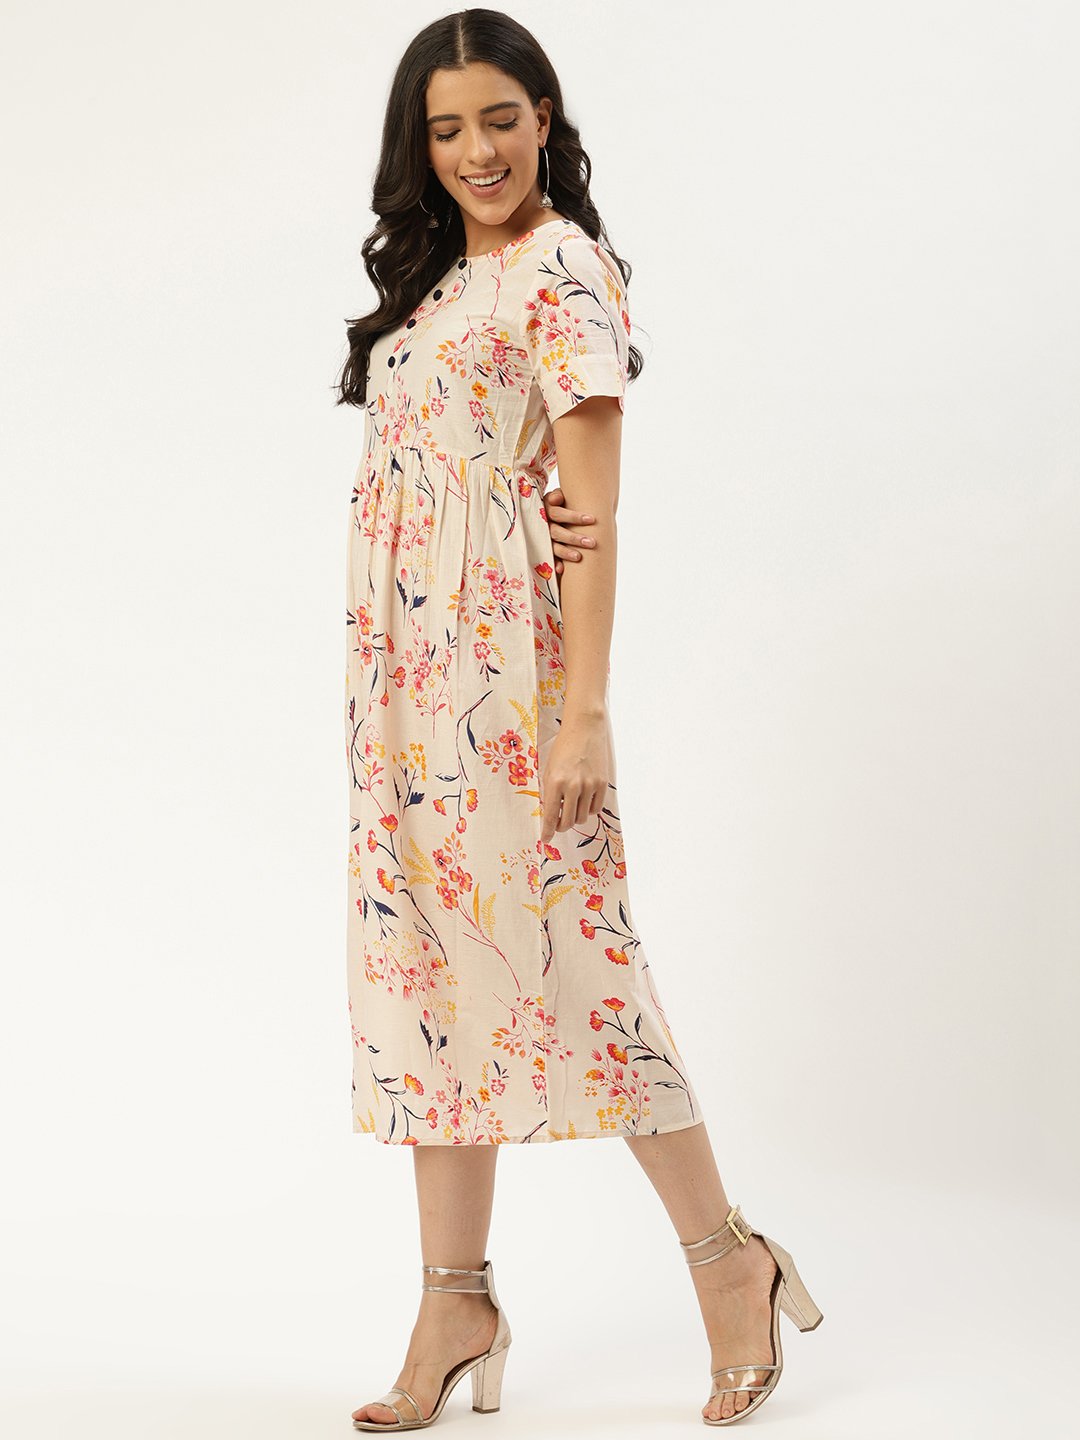 Women's Yellow Floral Printed Round Neck Cotton A-Line Dress - Nayo Clothing